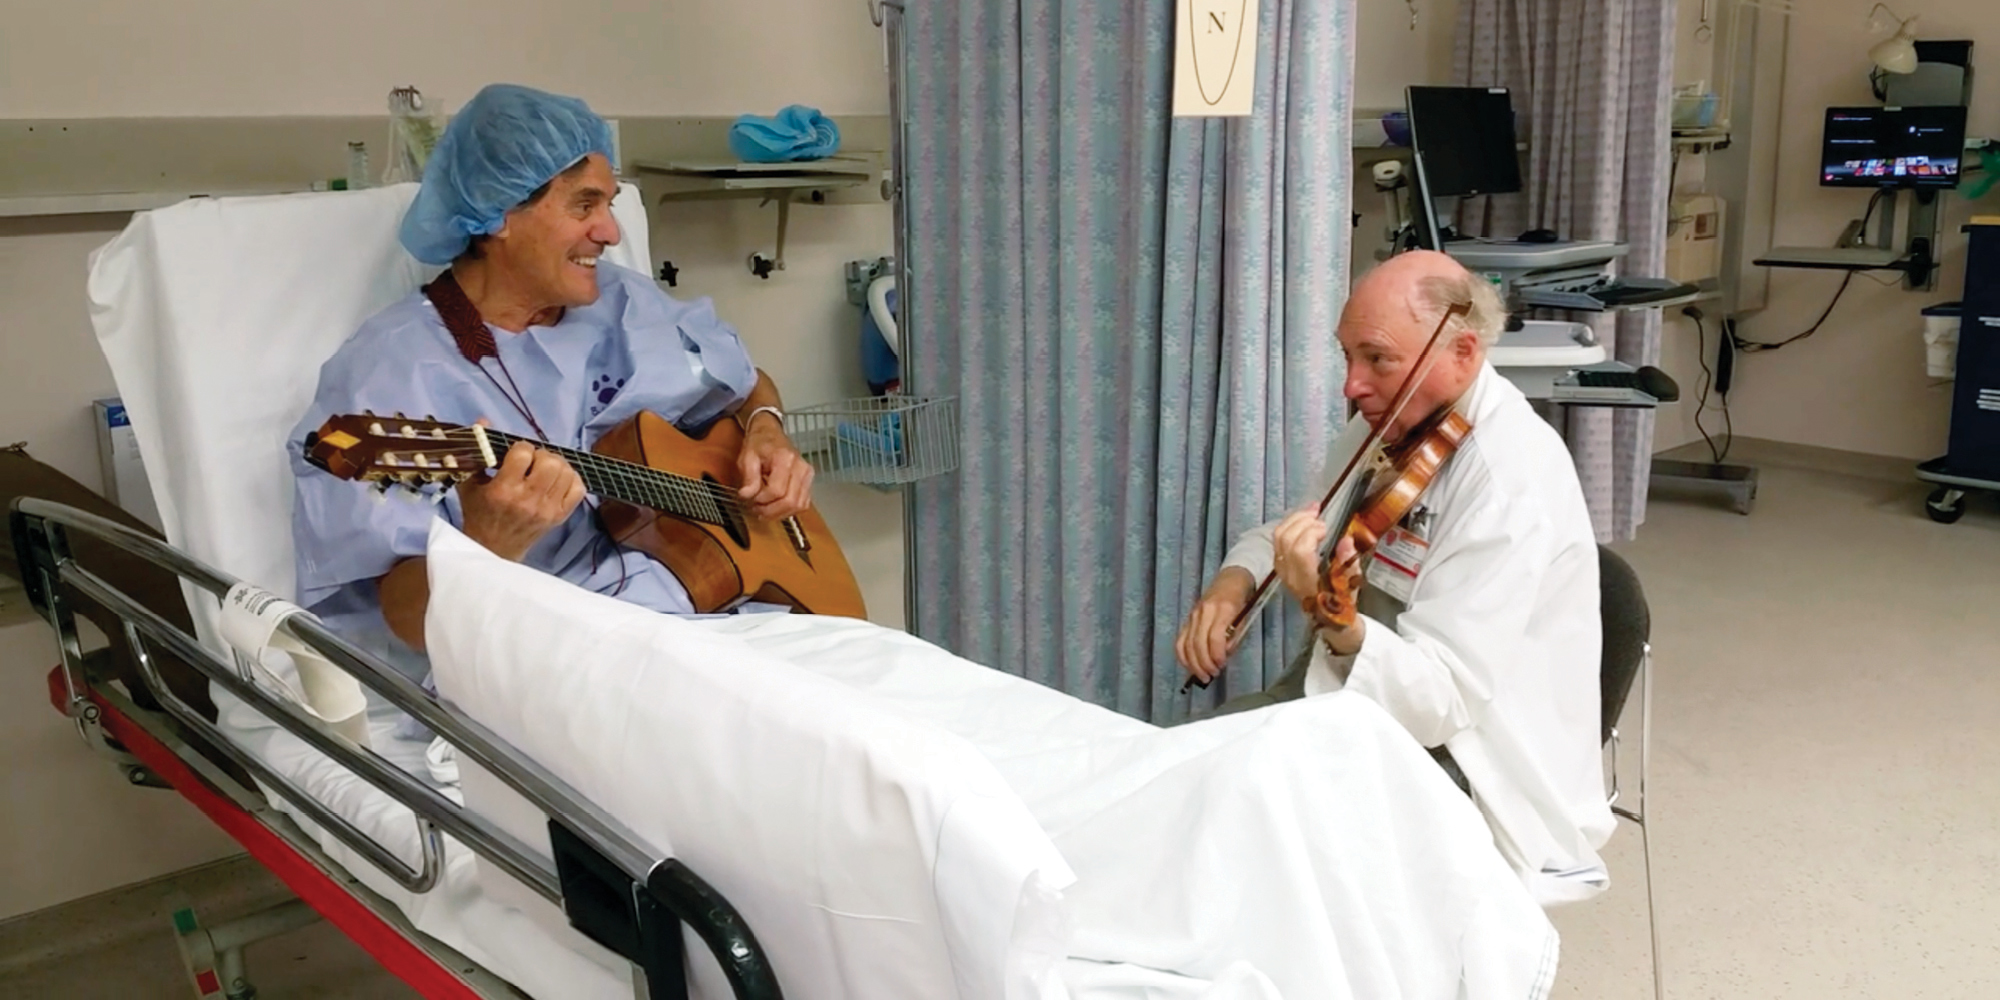 William Sloan and a patient playing a song before surgery